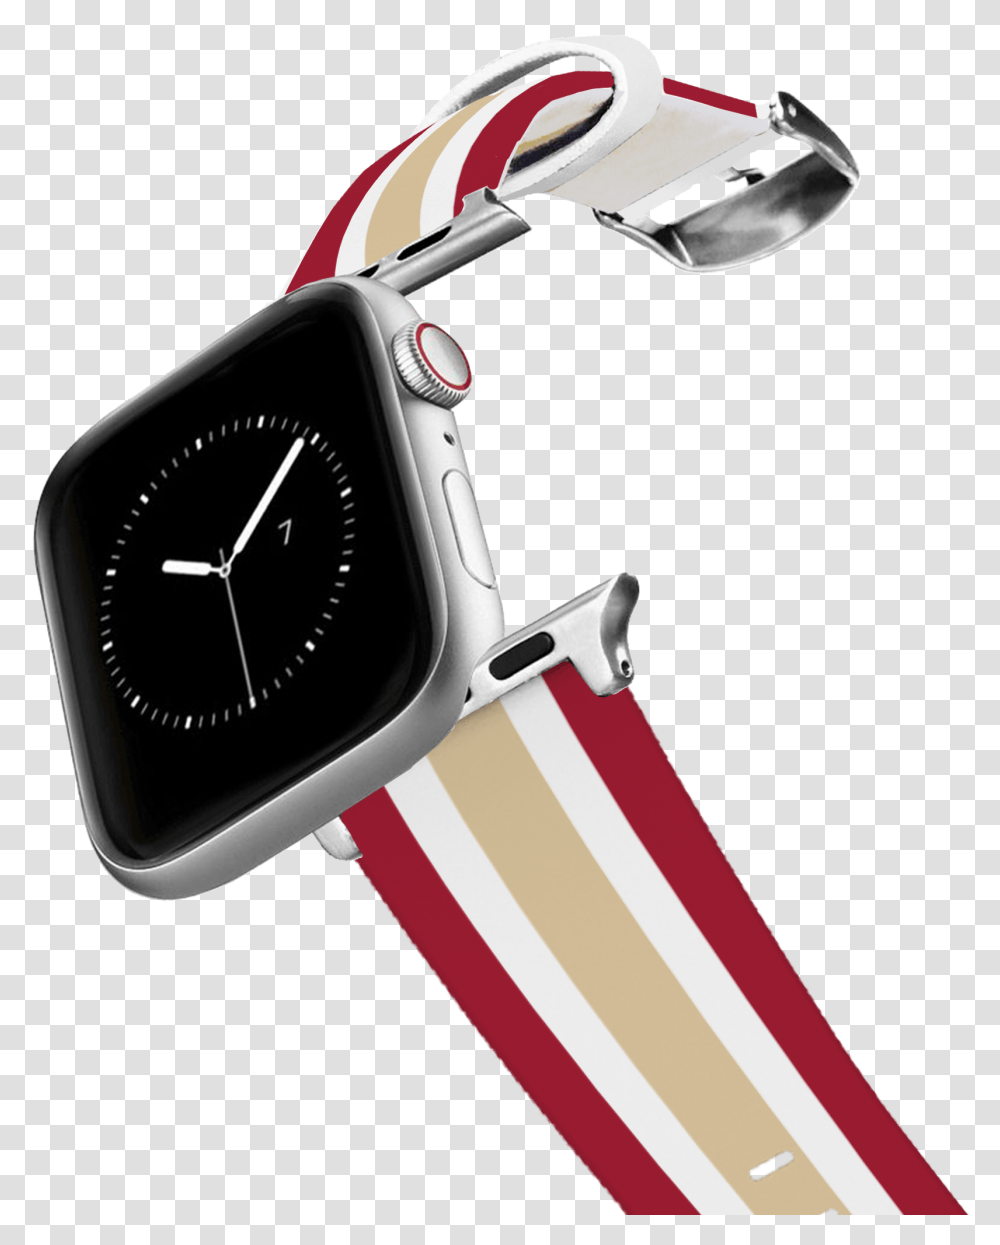 Boston Terrier Apple Watch Band, Analog Clock, Blow Dryer, Appliance, Hair Drier Transparent Png